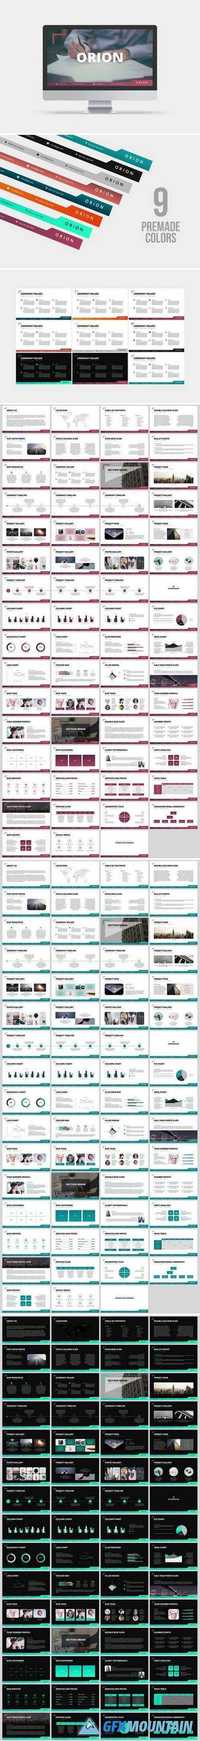 Orion PowerPoint Template 690692